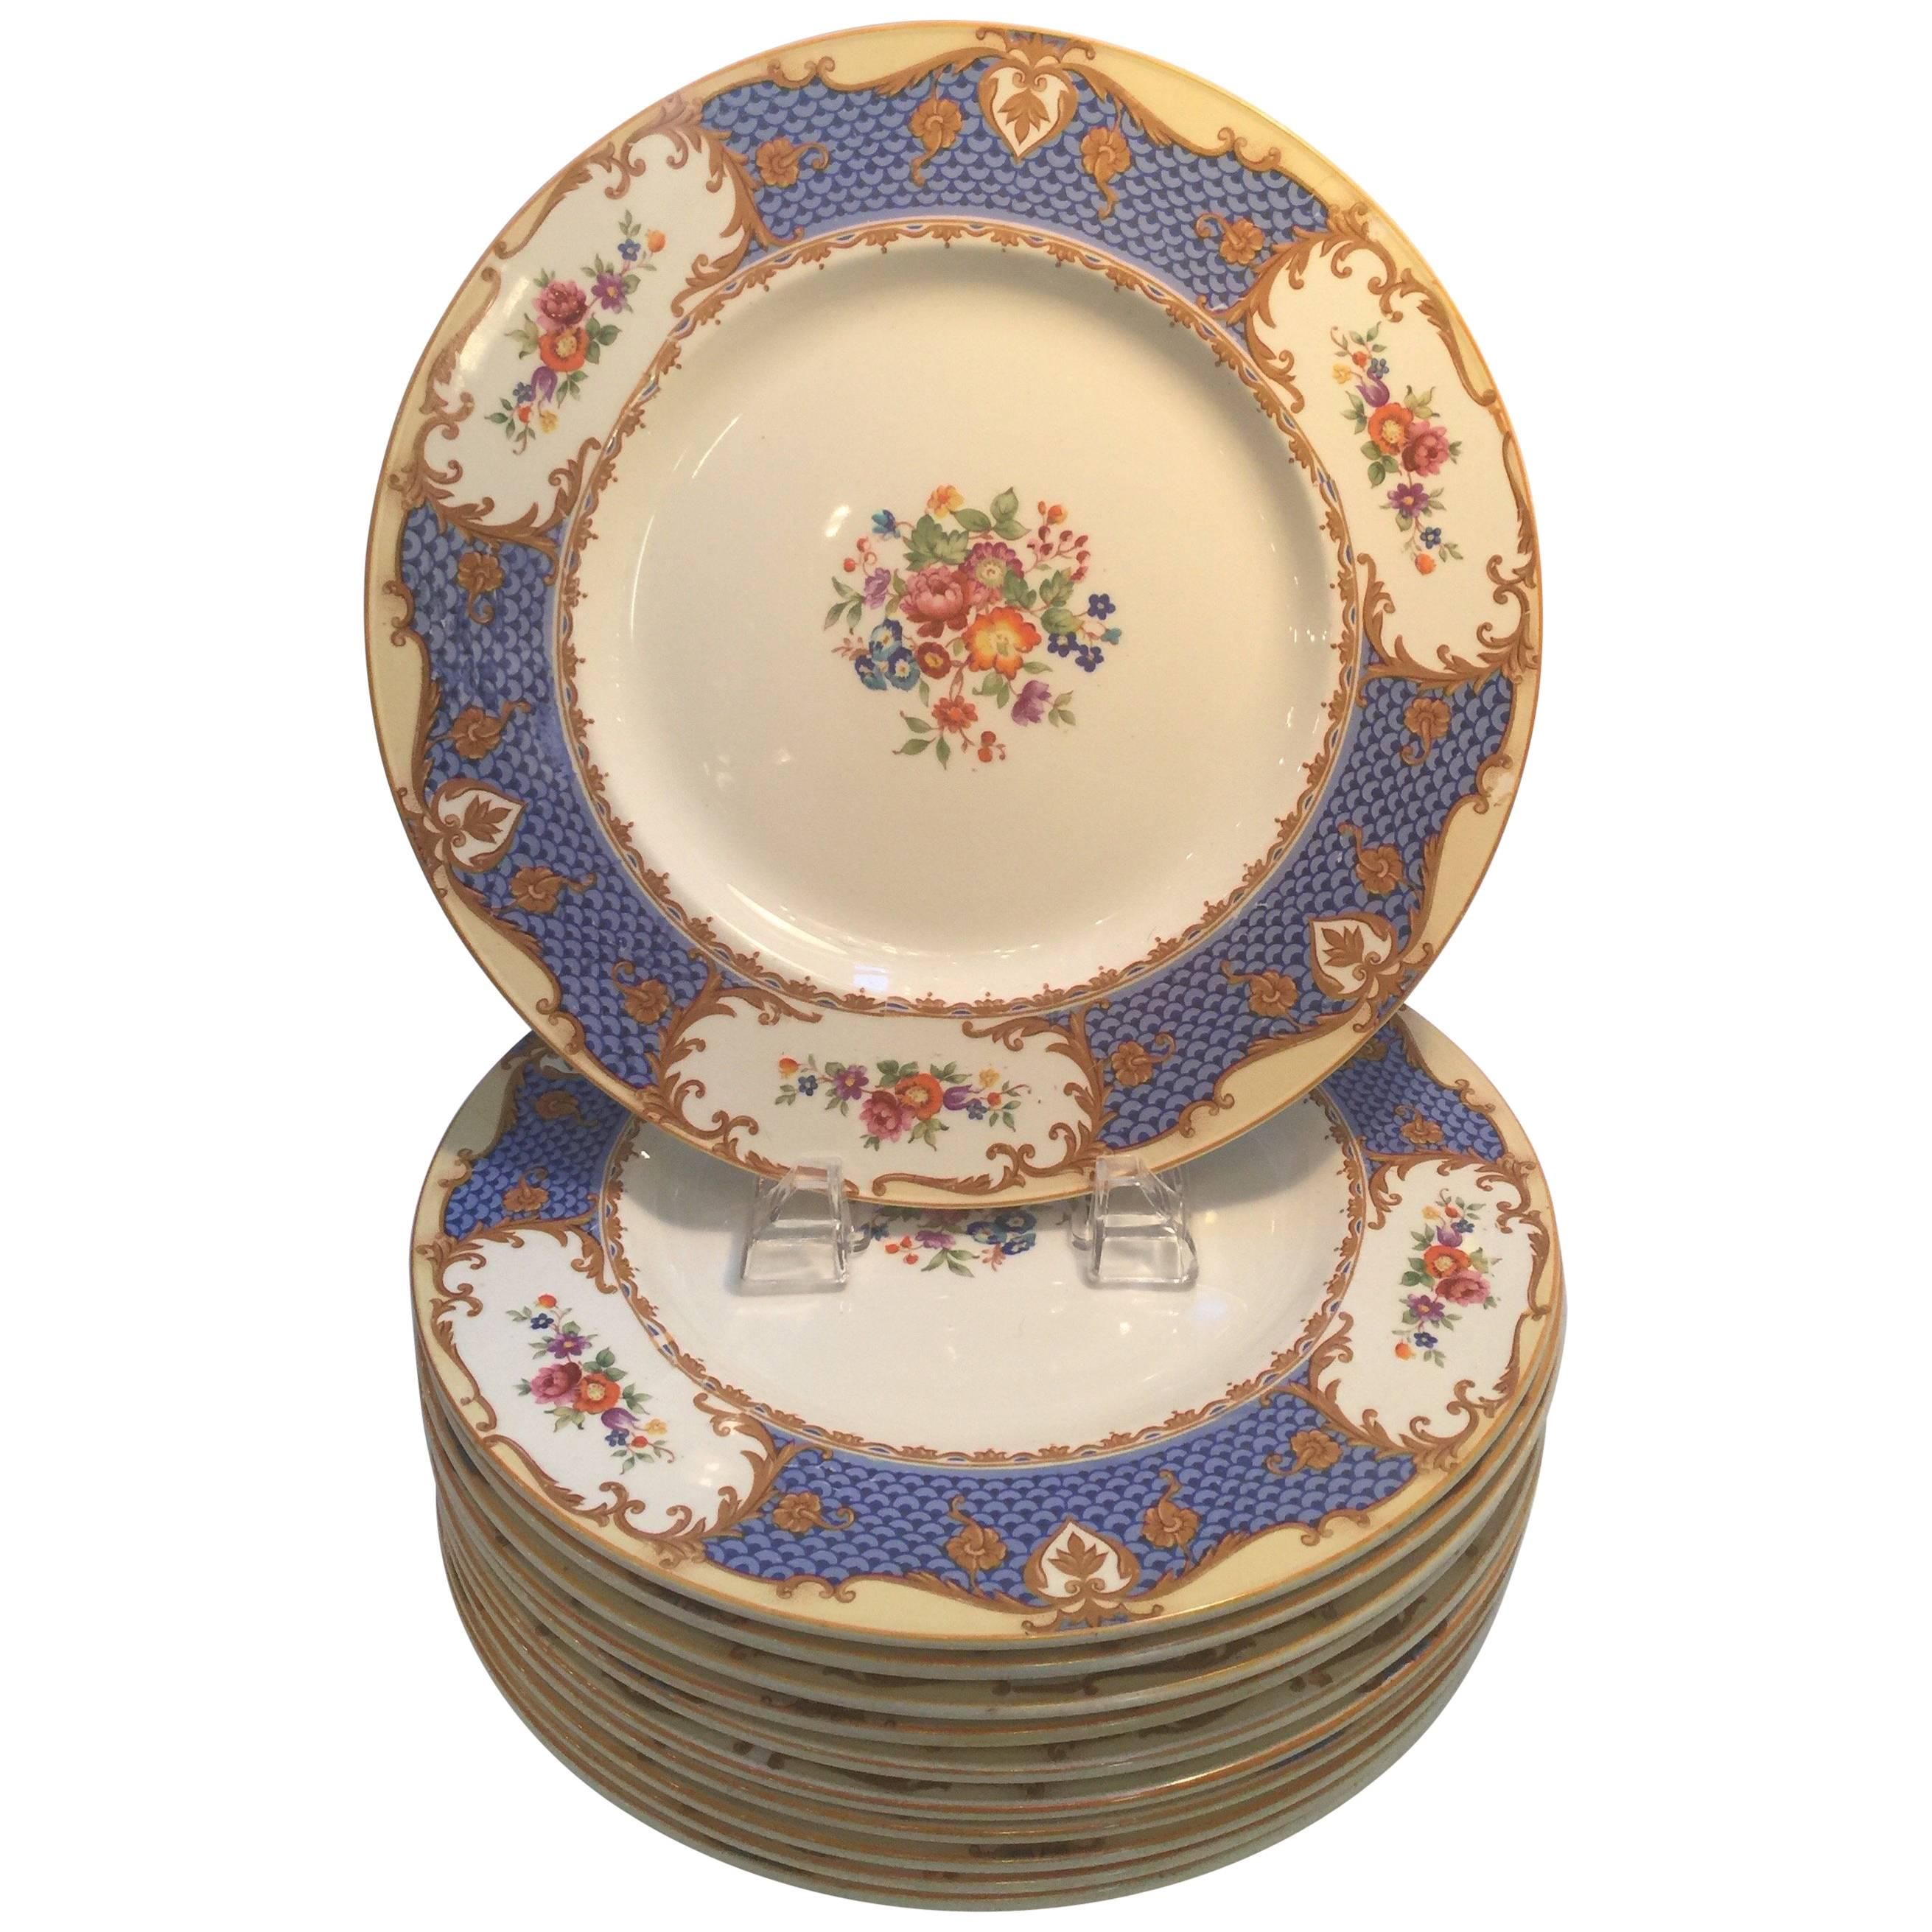 Set of Ten Hand-Painted English Service Plates